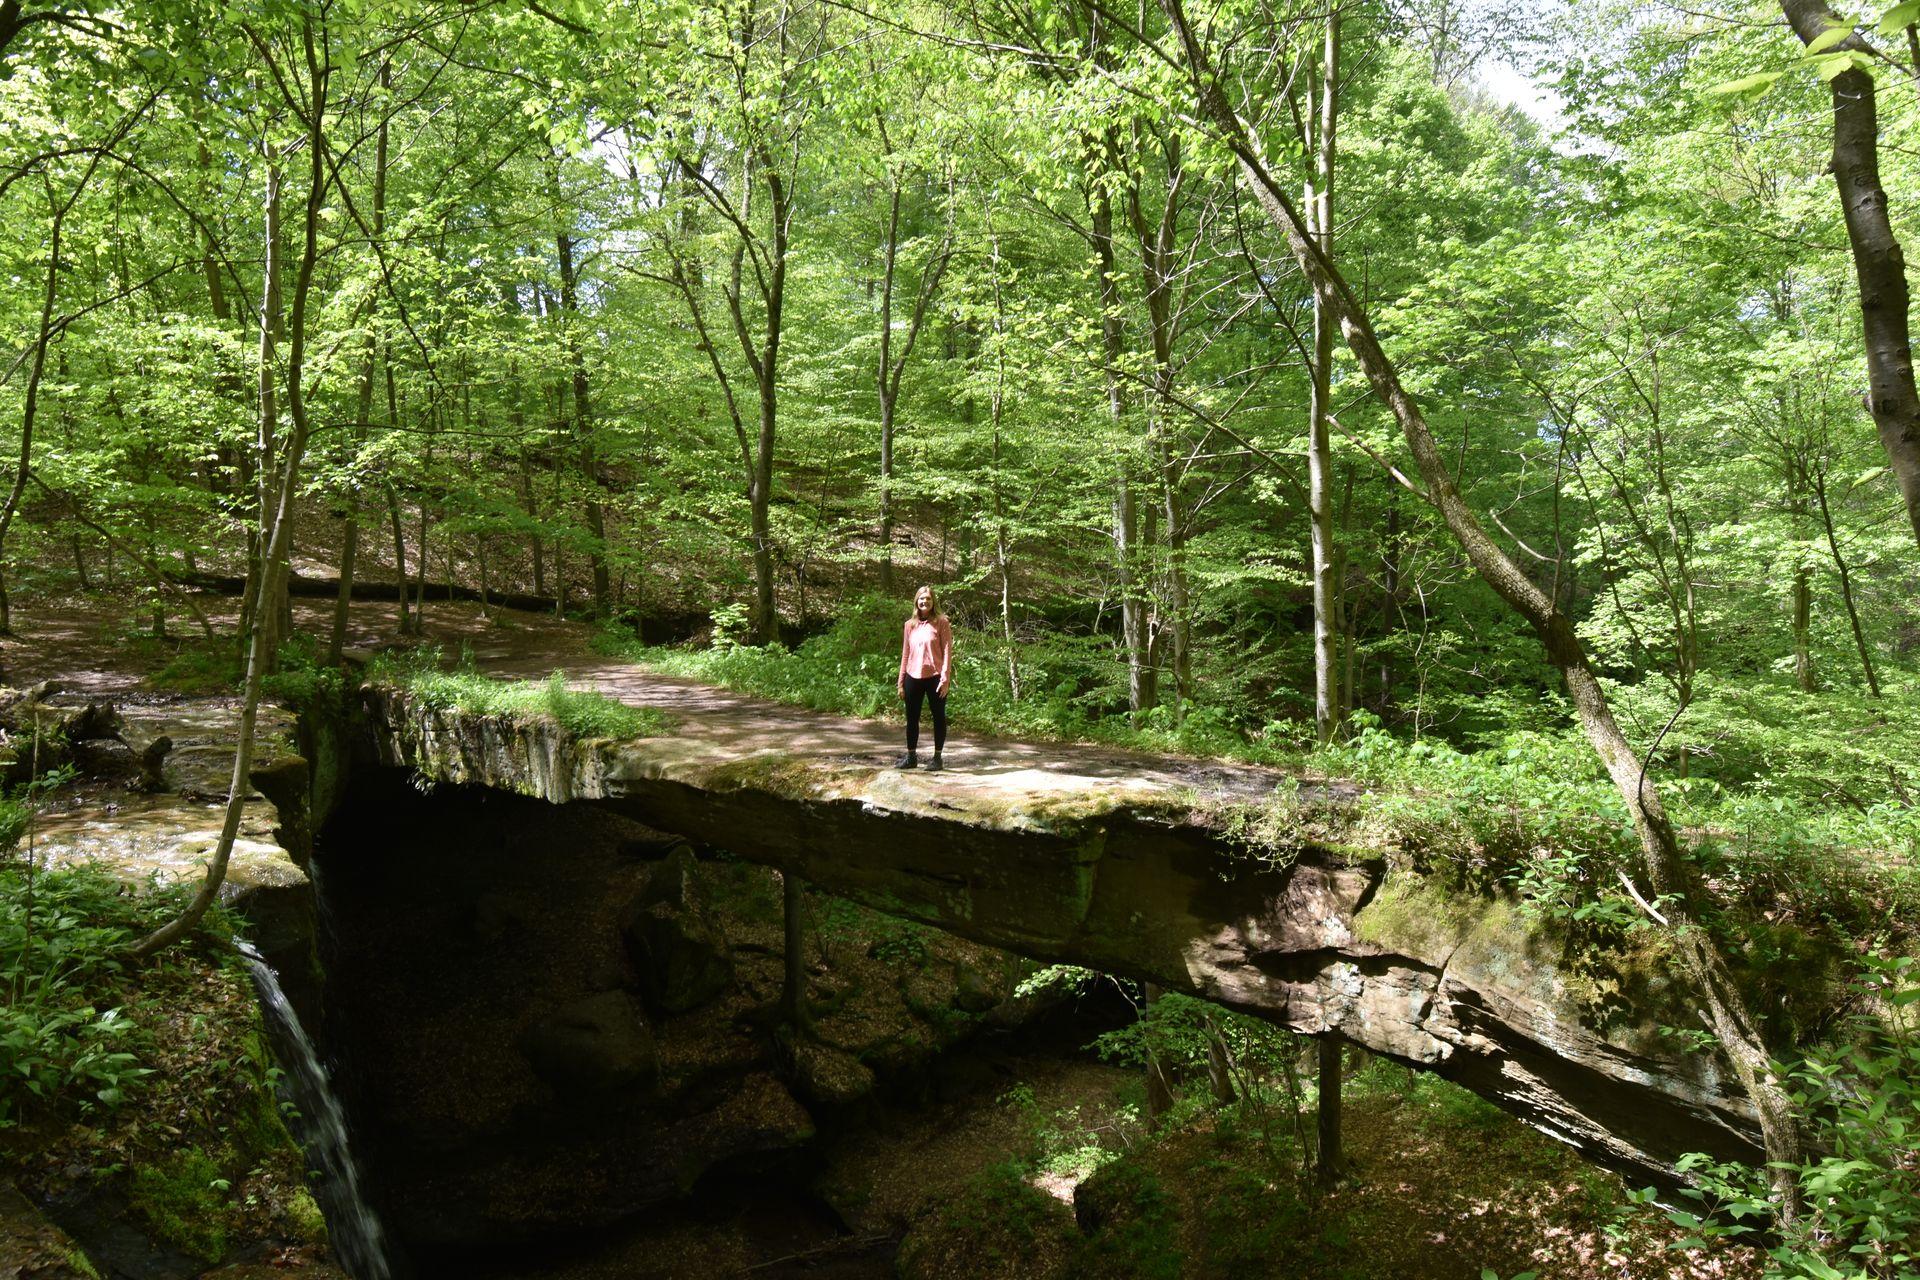 Lydia standing on a large natural bridge with trees in the background.